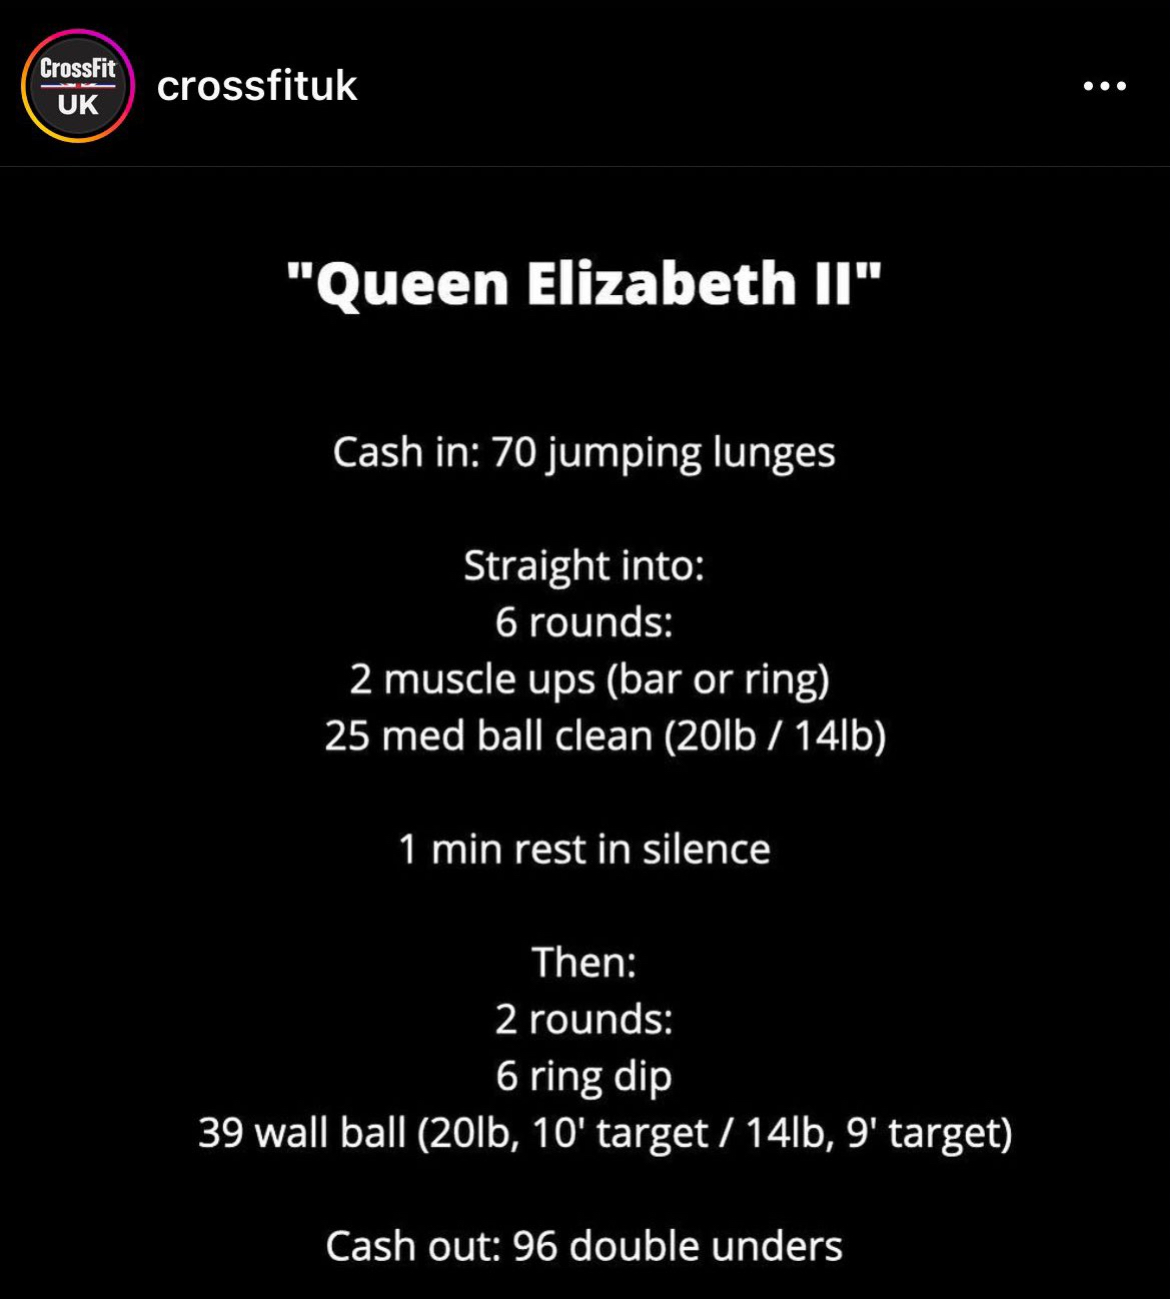 Queen Elizabeth II Death Reactions - screenshot - CrossFit Uk crossfituk "Queen Elizabeth Ii" Cash in 70 jumping lunges Straight into 6 rounds 2 muscle ups bar or ring 25 med ball clean 20lb14lb 1 min rest in silence Then 2 rounds 6 ring dip 39 wall ball 